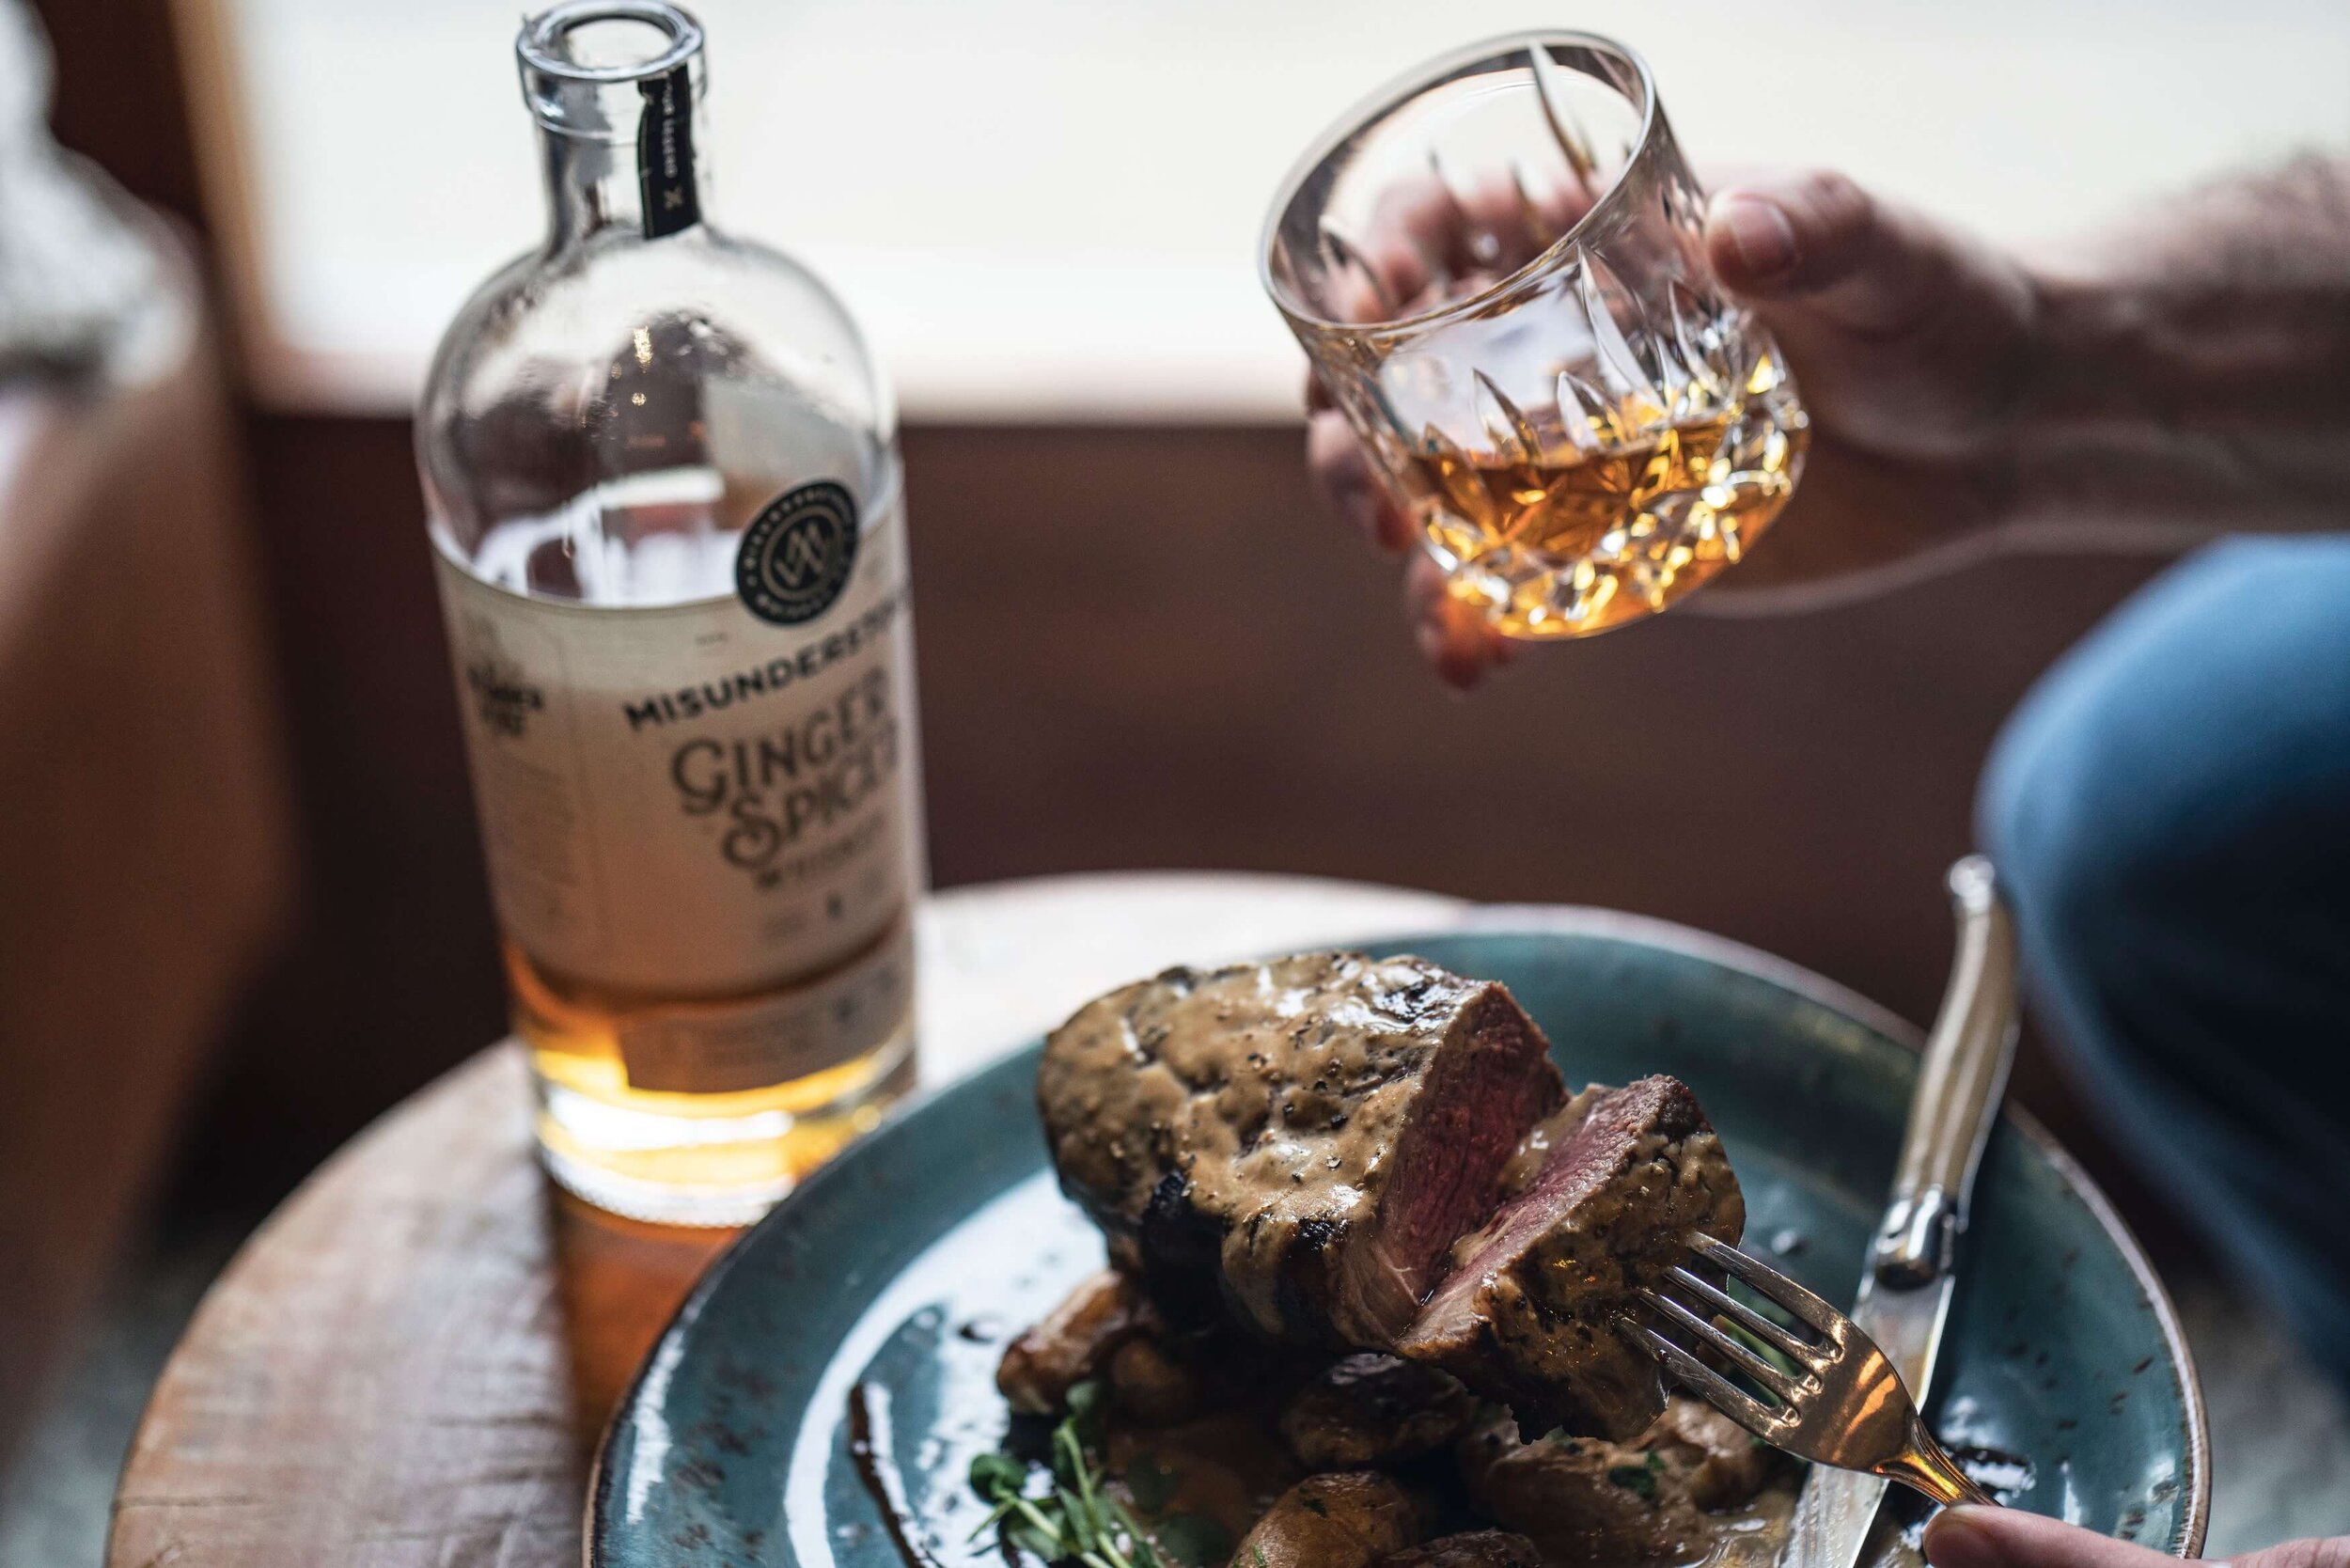 What Are Some Recommended Food Pairings With Whiskey?